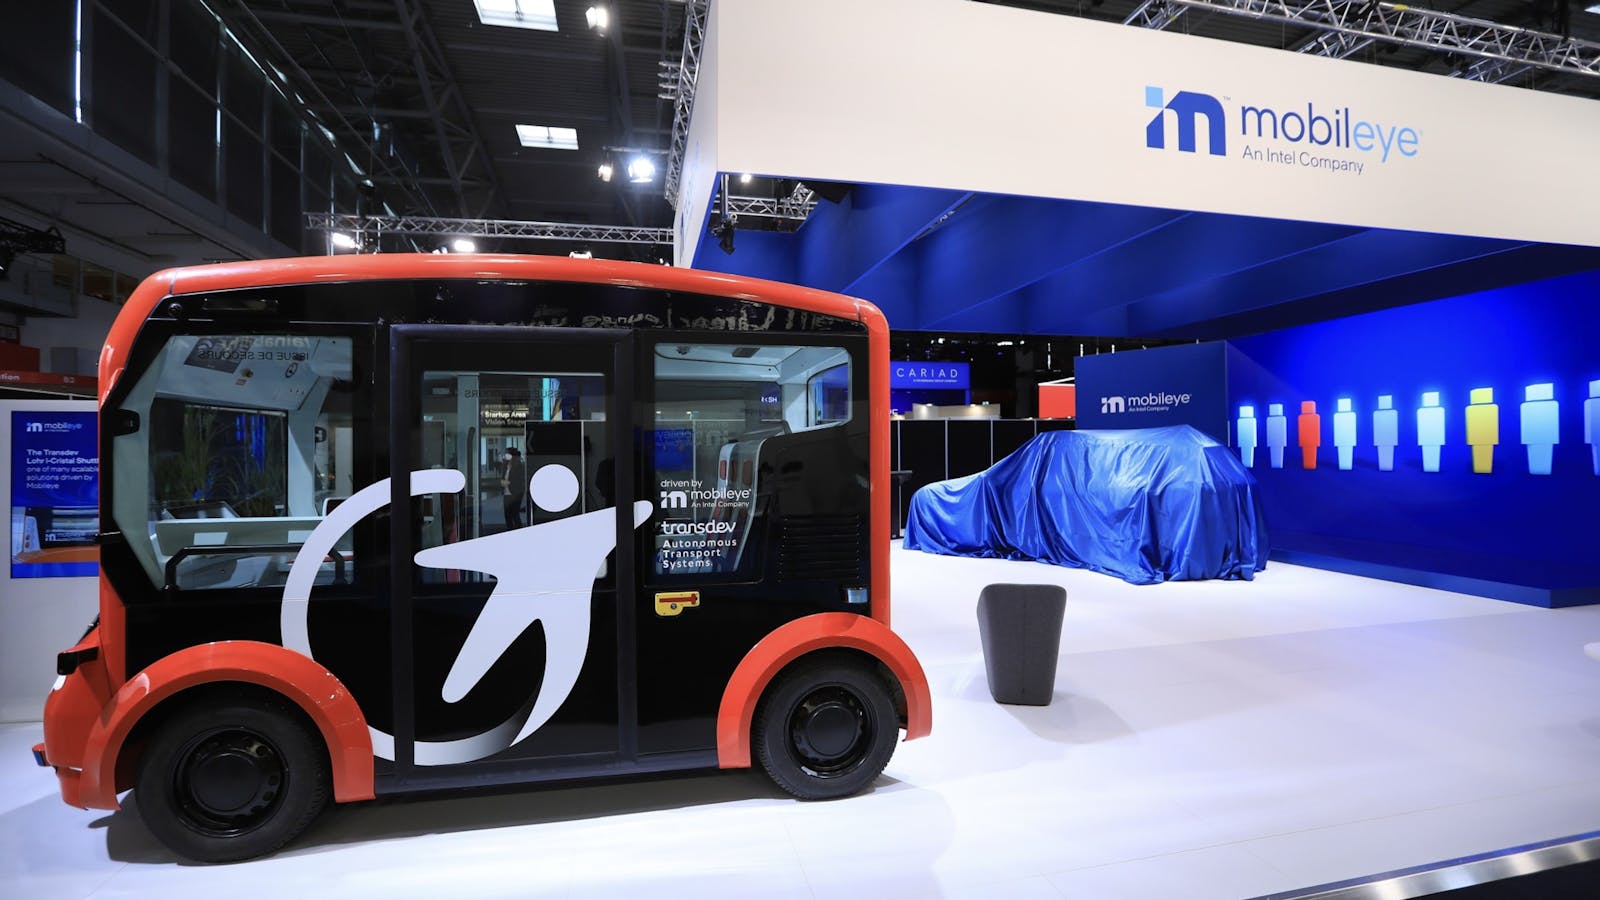 Mobileye's stand at the Munich Motor Show in September. Photo by Bloomberg.